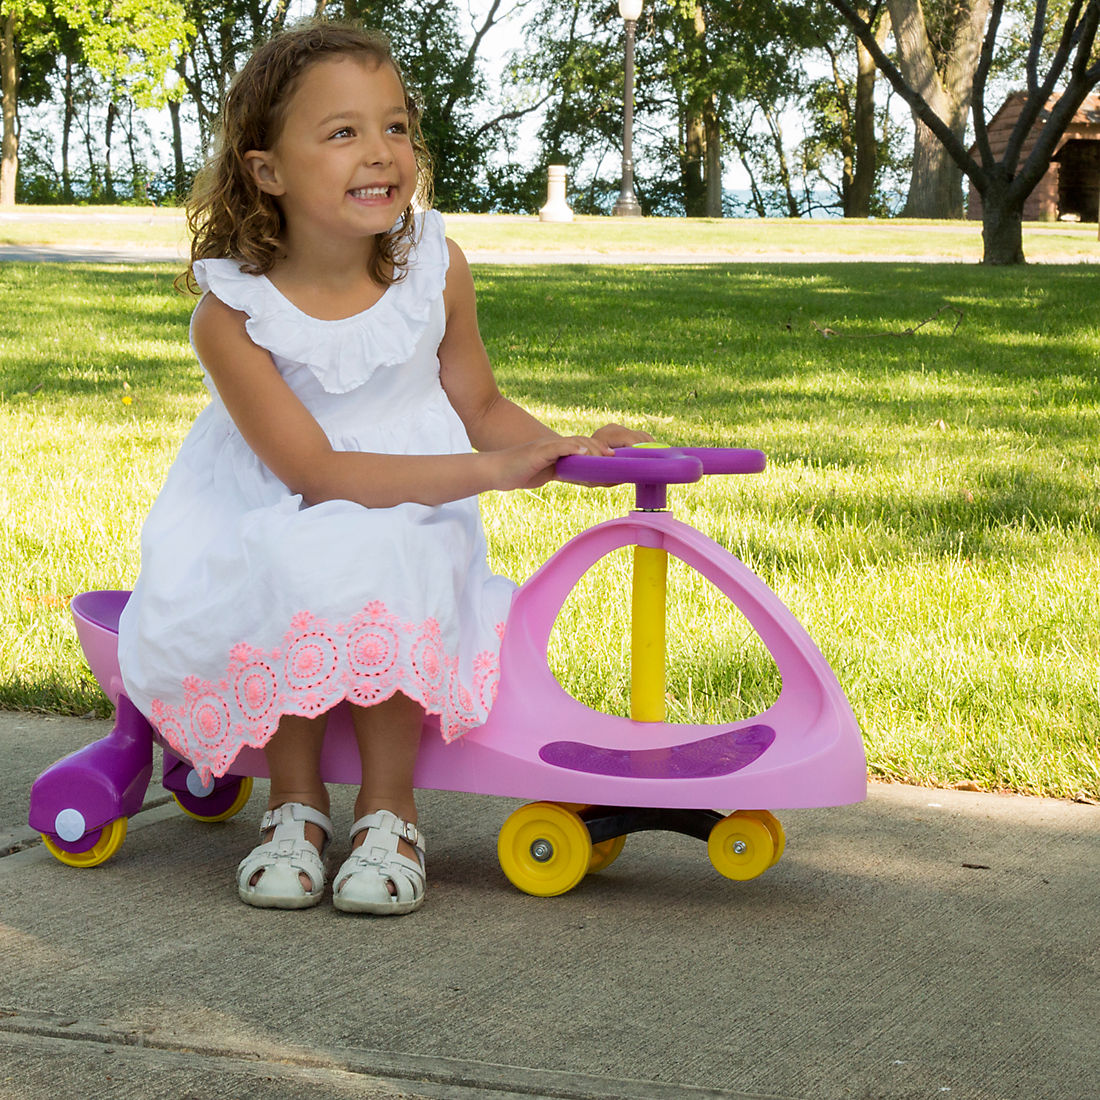 Lil Rider Twist Roller Swing Pink Purple Wiggle Car Ride on Kids Outdoor Toy for sale online